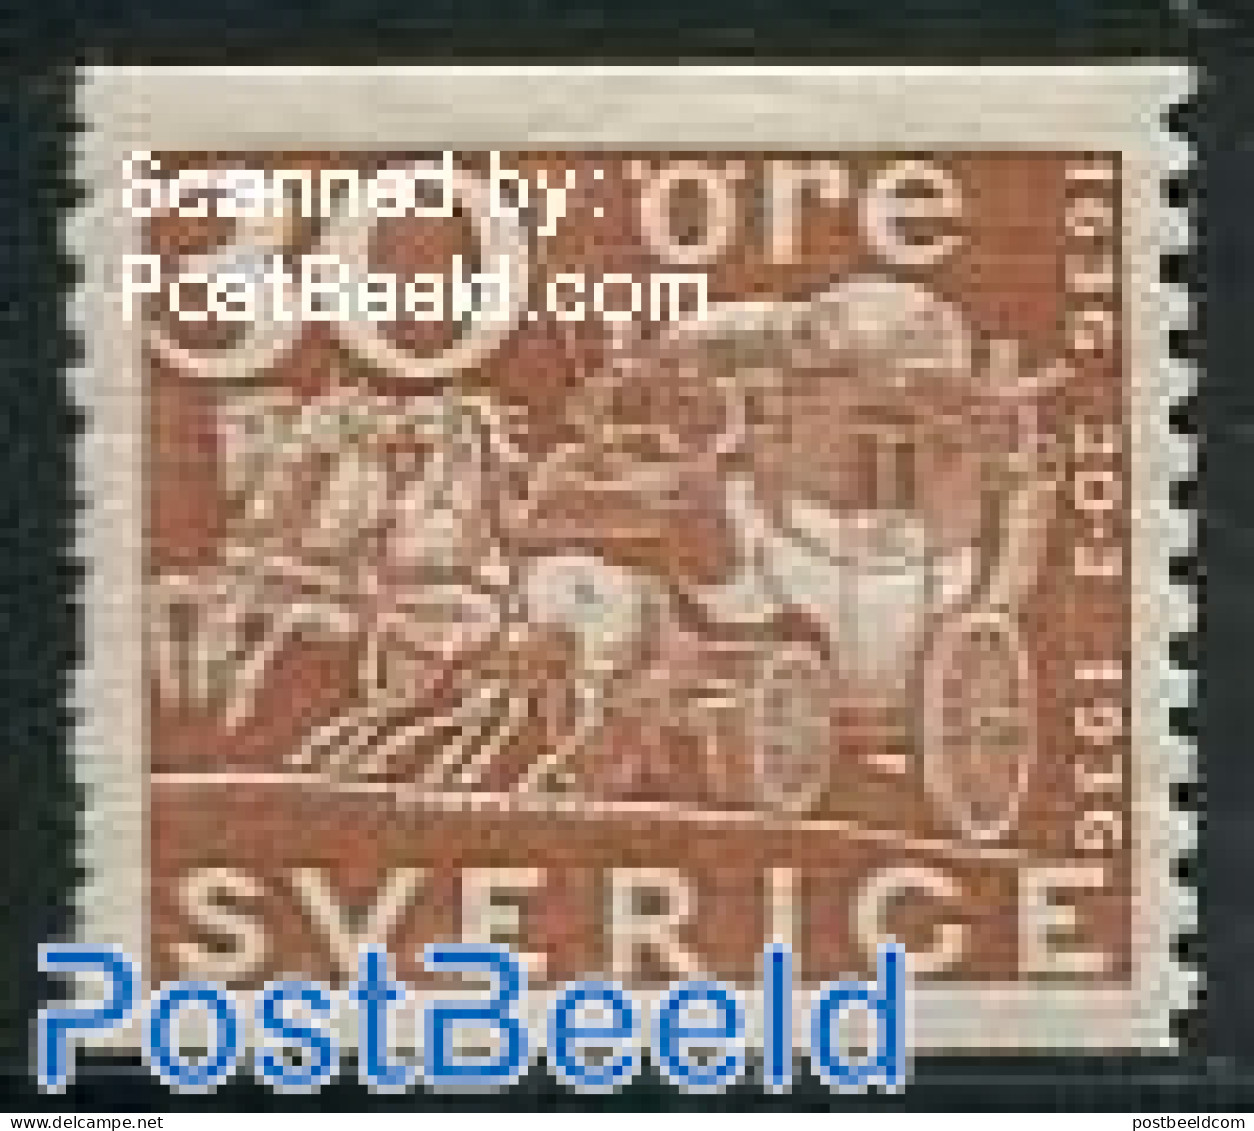 Sweden 1936 30o, Stamp Out Of Set, Unused (hinged), Nature - Transport - Horses - Coaches - Ungebraucht